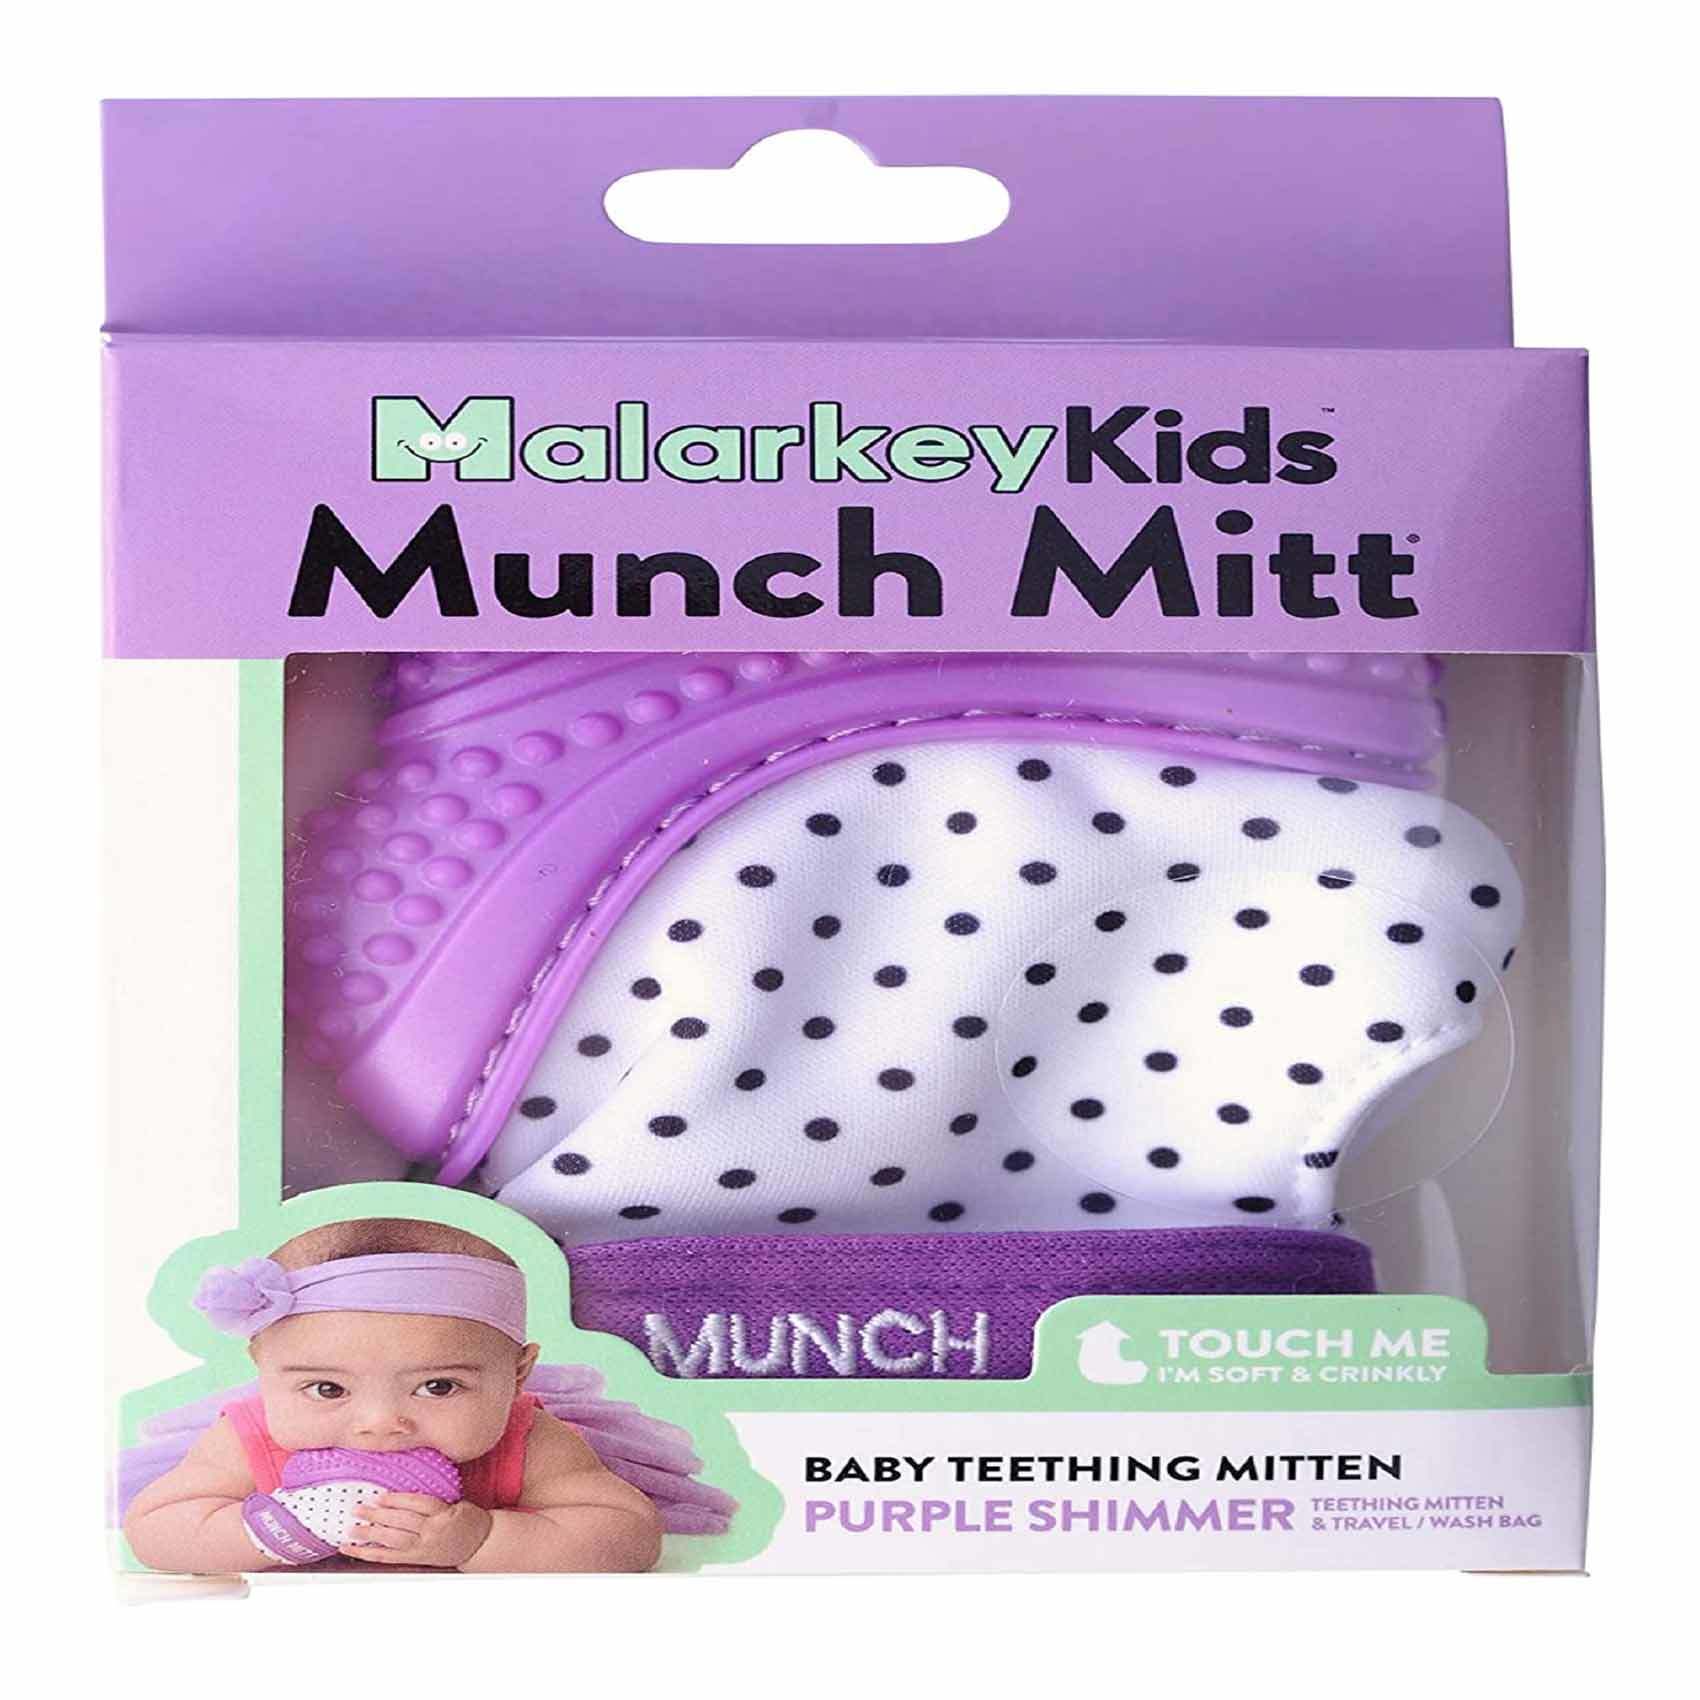 Buy Malarkey Munch Mitt Baby Teething Mitten MM02P Multicolour Online -  Shop Baby Products on Carrefour UAE